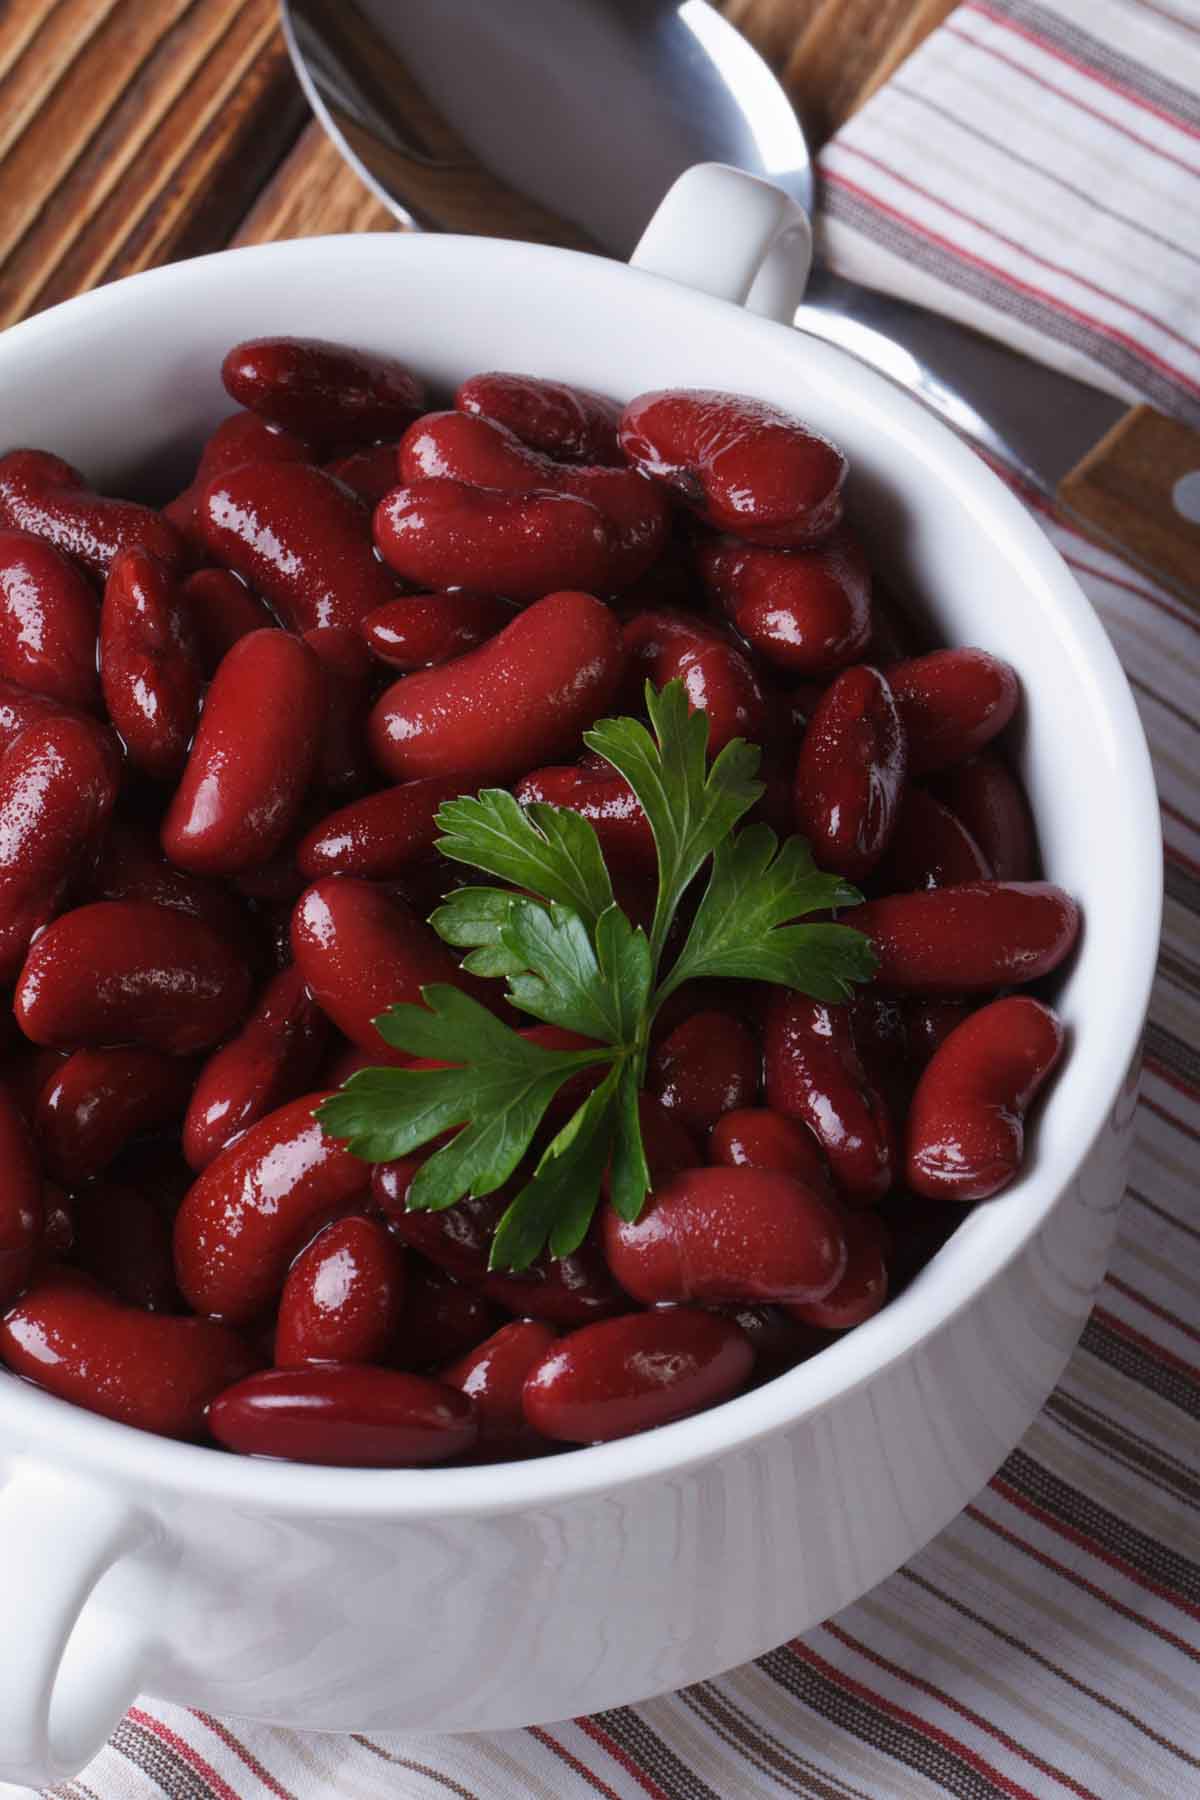 Kidney Beans in a bowl.